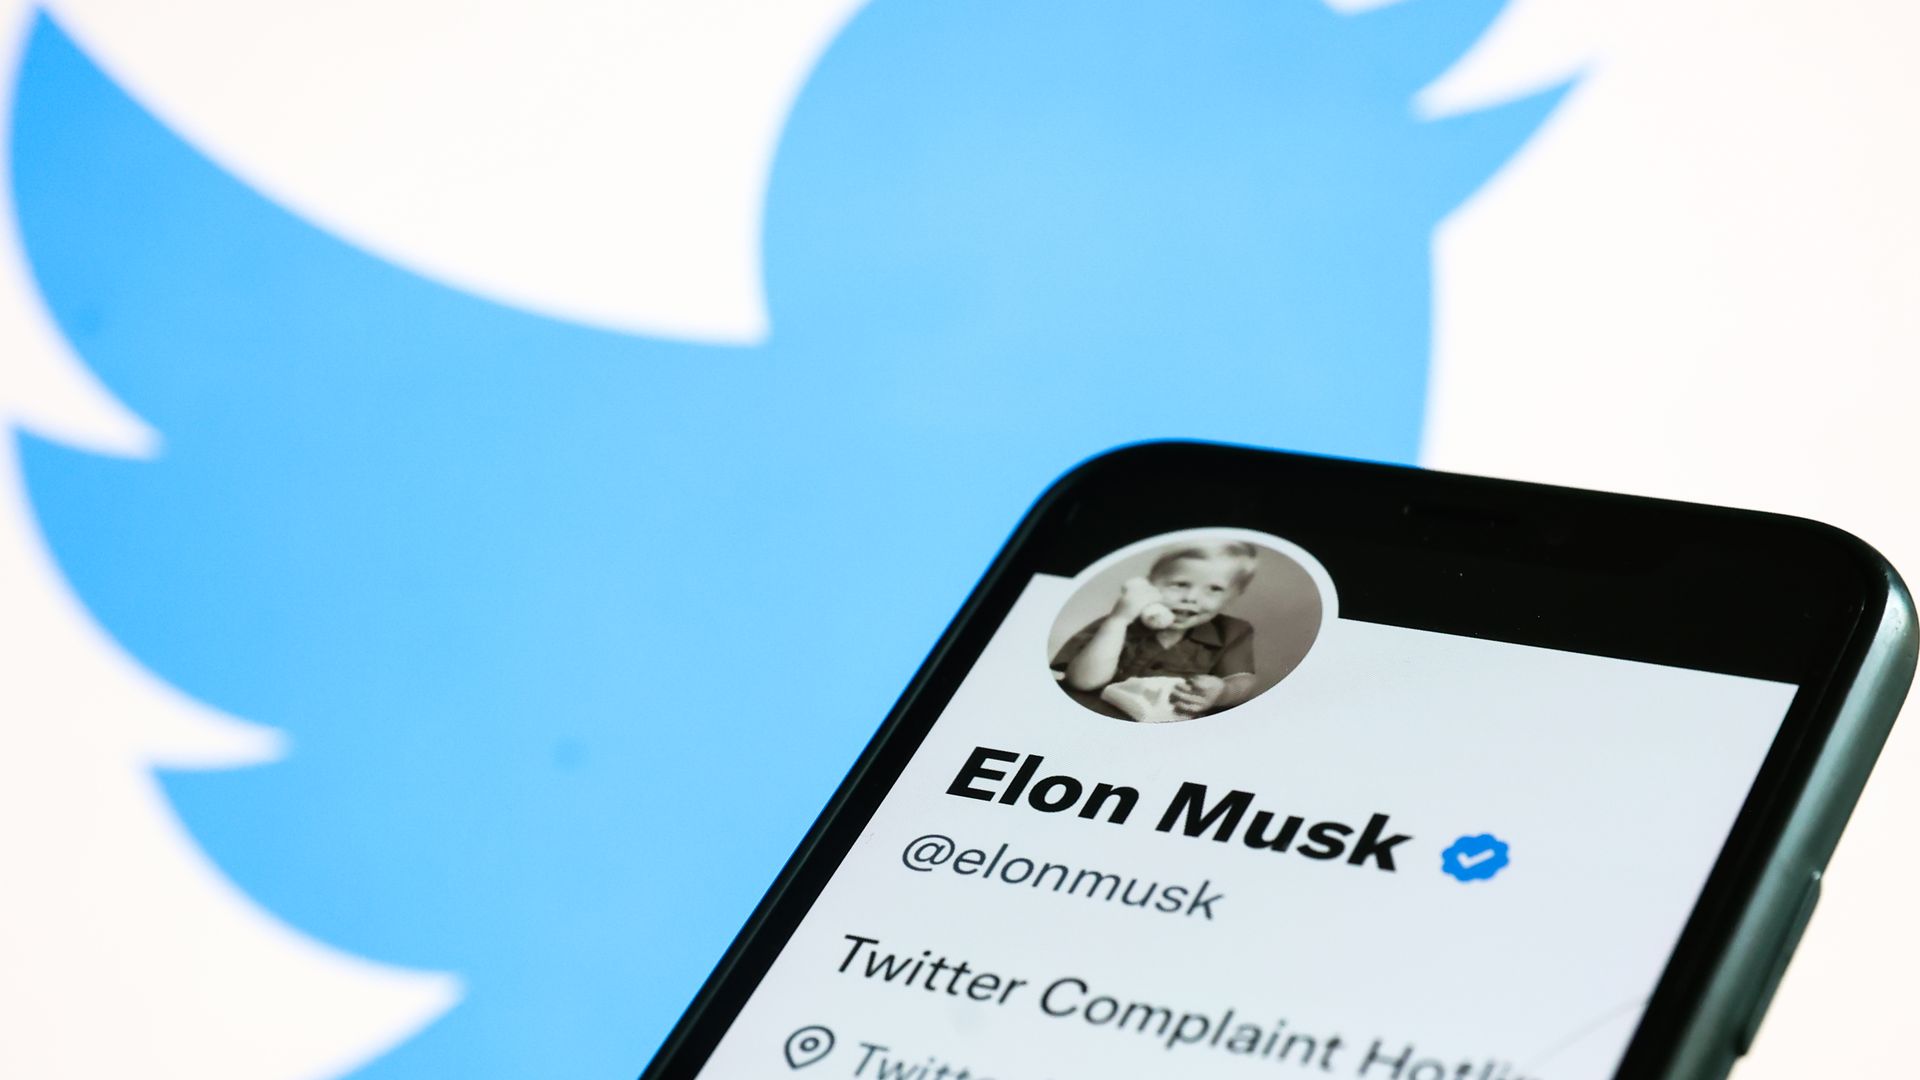 Elon Musk's Twitter account displayed on a phone screen and Twitter logo displayed on a laptop screen are seen in this illustration photo taken in Krakow, Poland on November 1